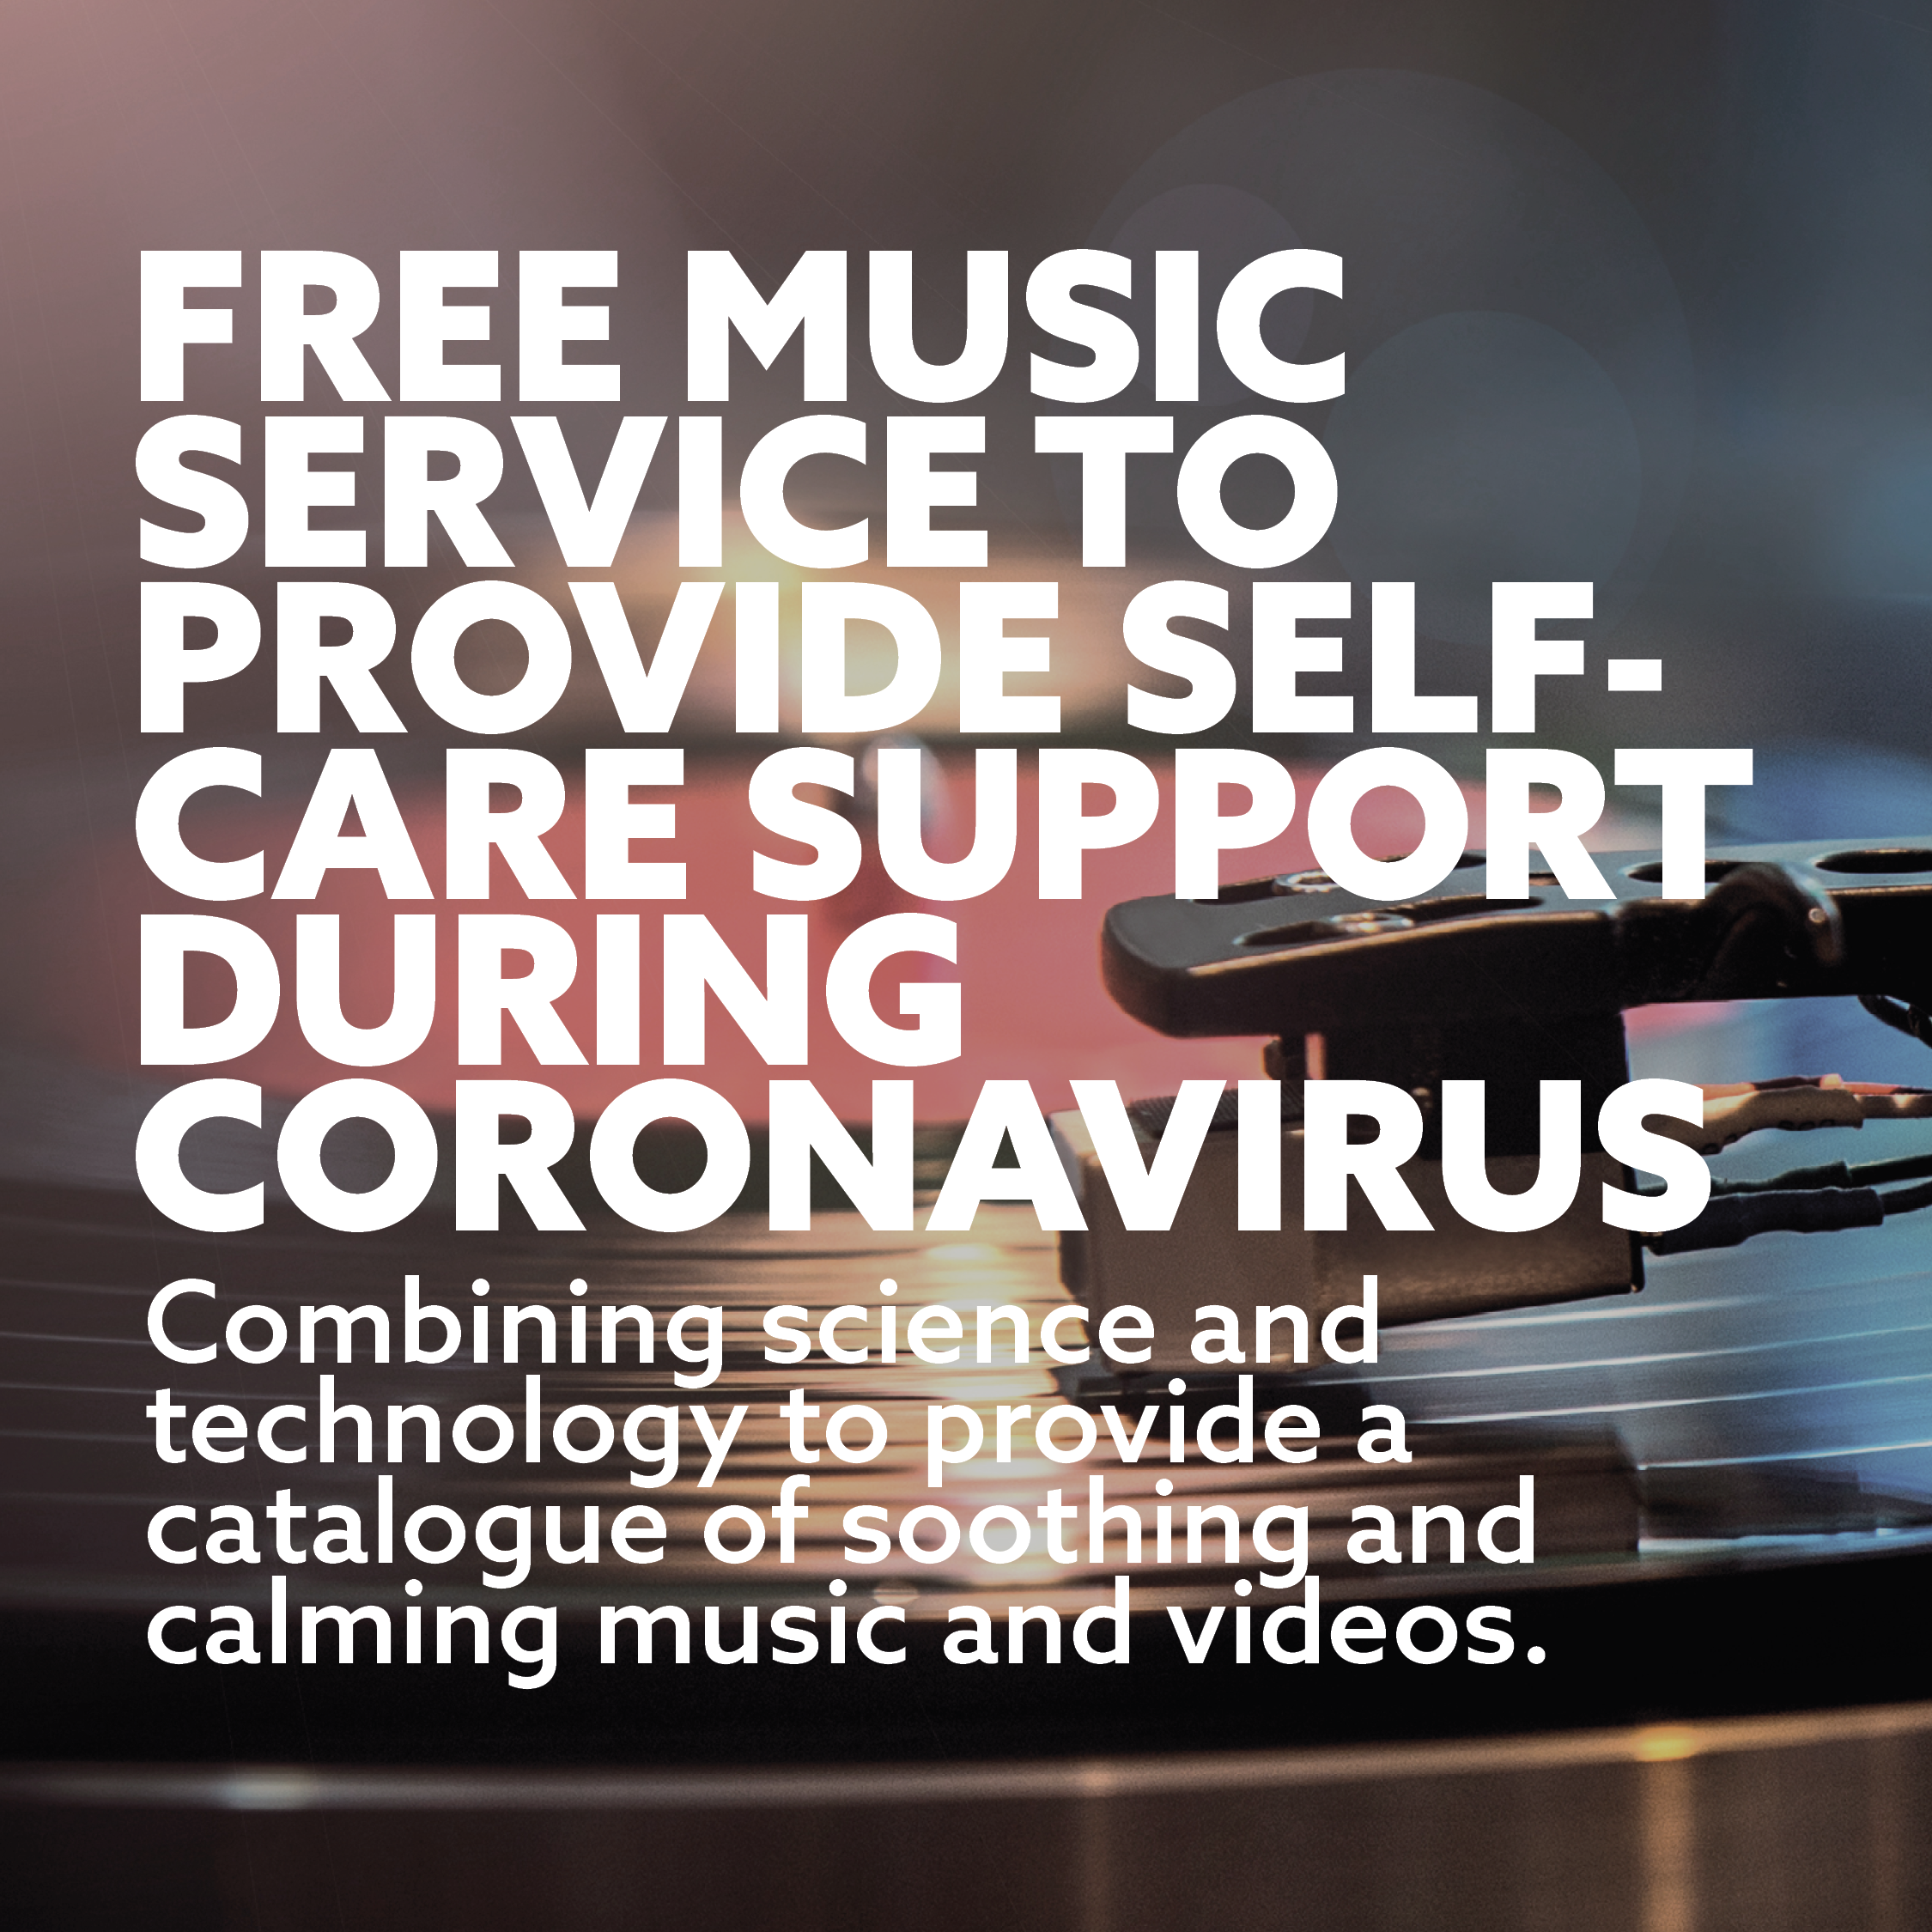 Free music service developed for selfcare